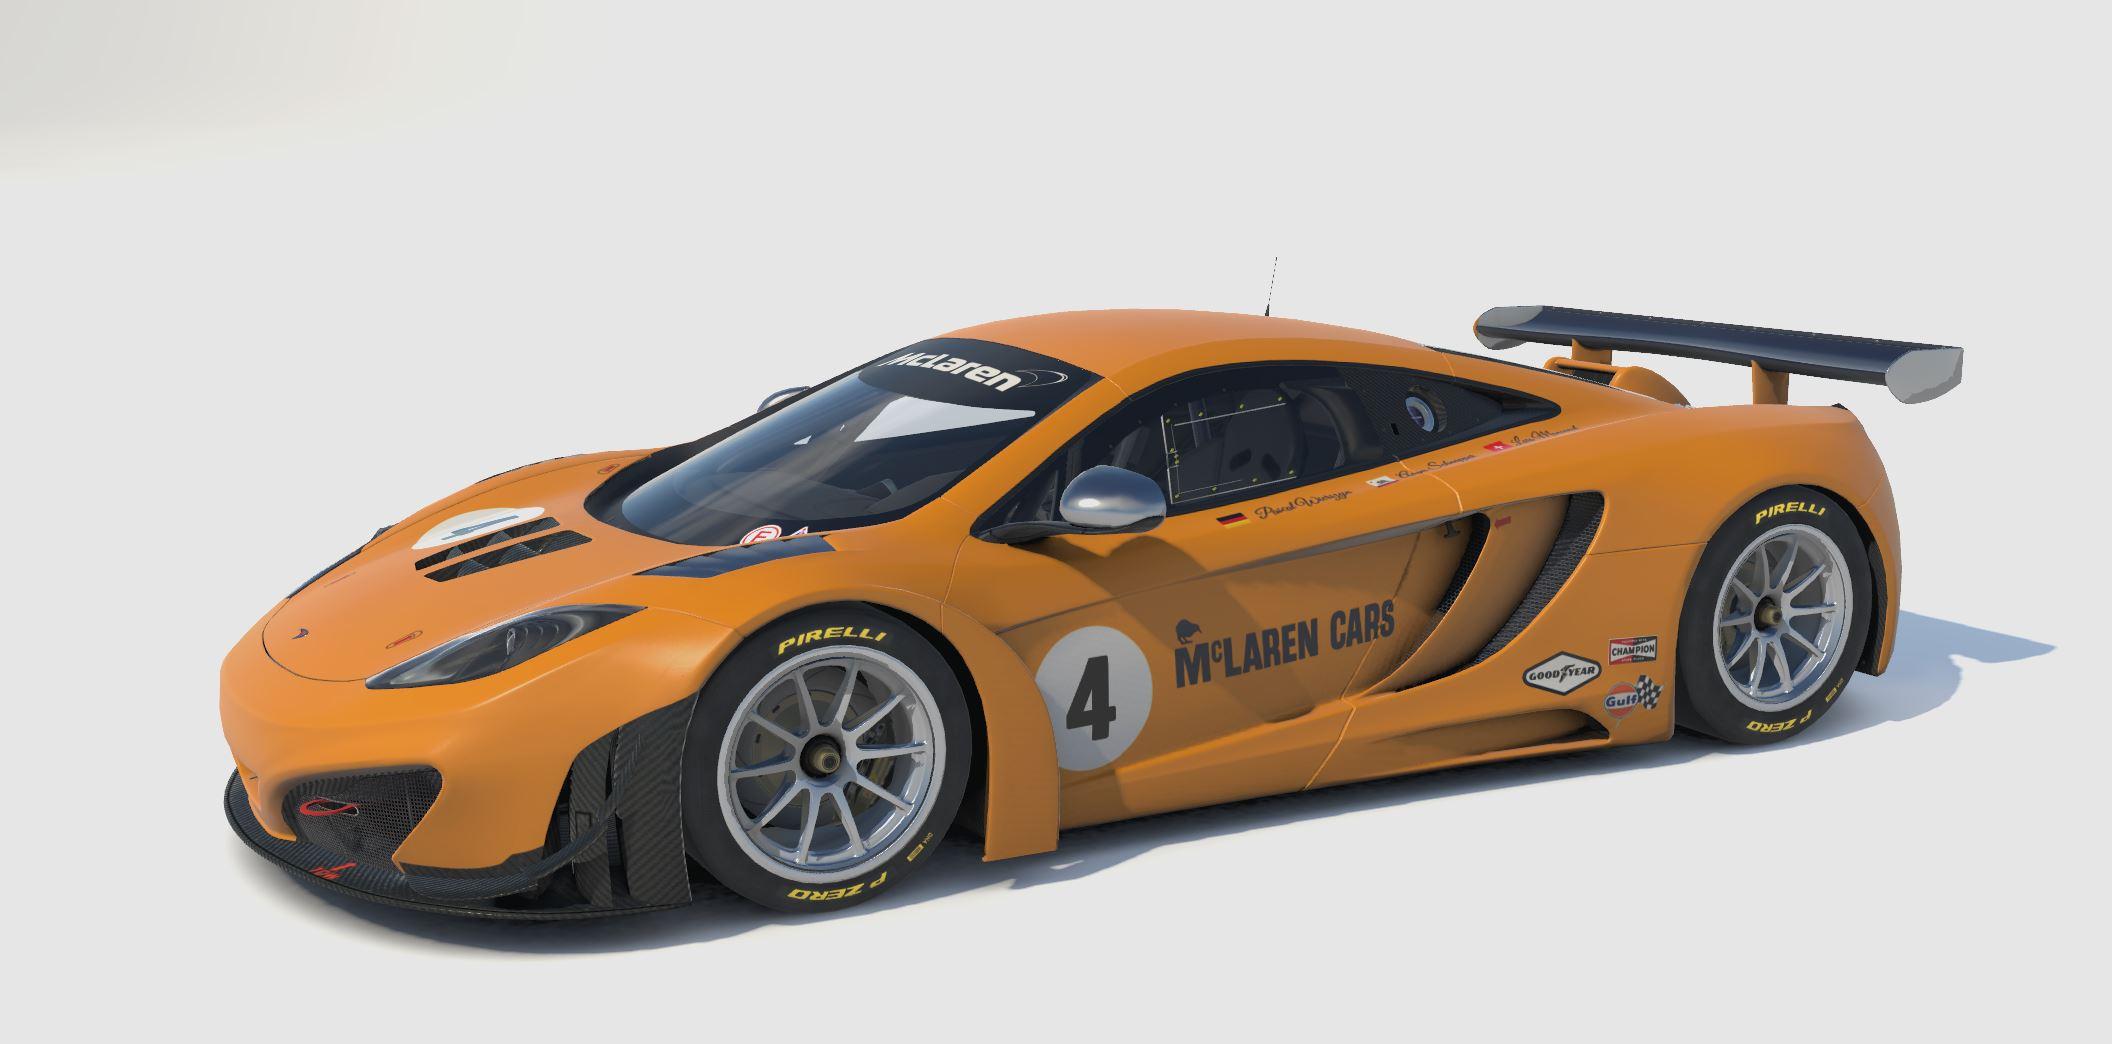 Preview of McLaren Cars 60s Vintage Style Throwback - 2022 10hrs of Suzuka by Adam Schnapper